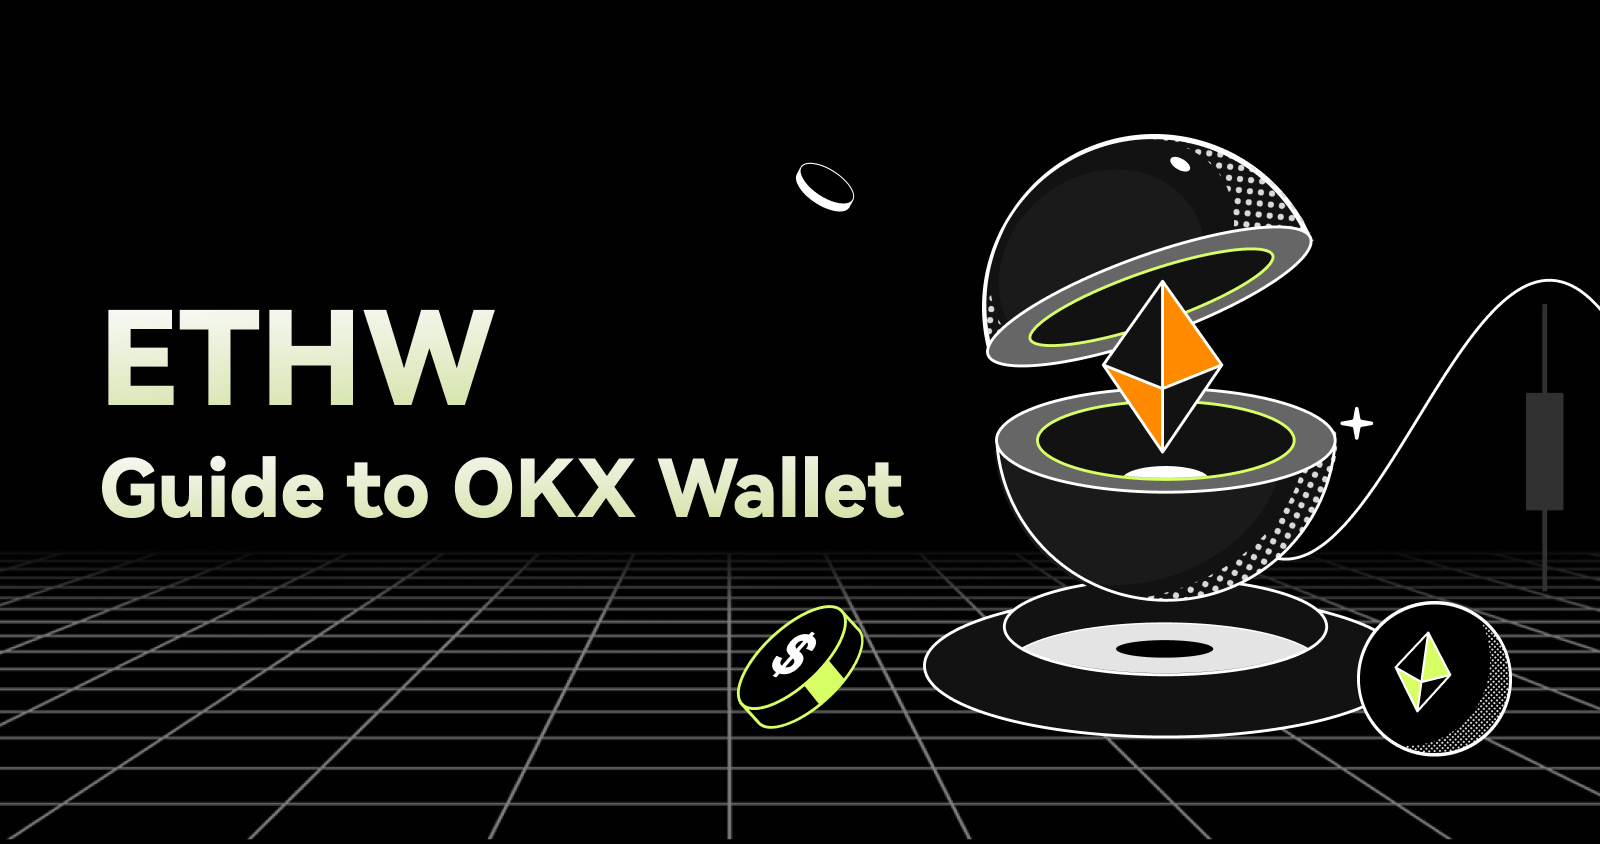 How to use the OKX Wallet with the ETHW network